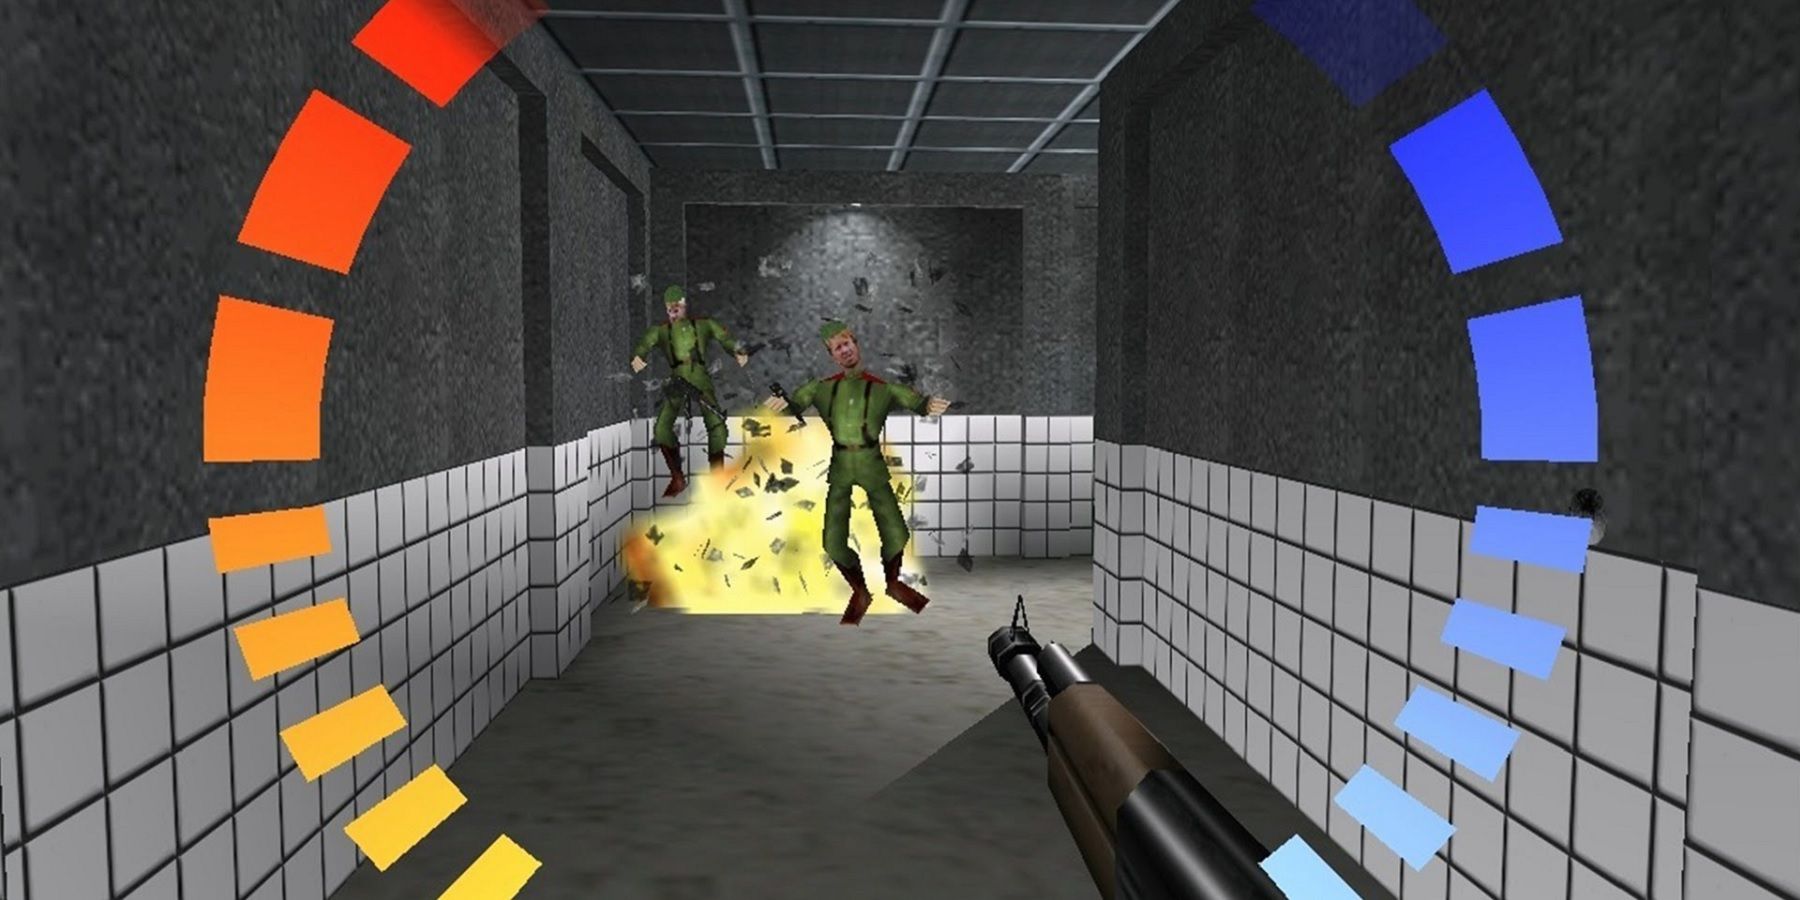 GoldenEye 007 coming to modern consoles this month, says leaker